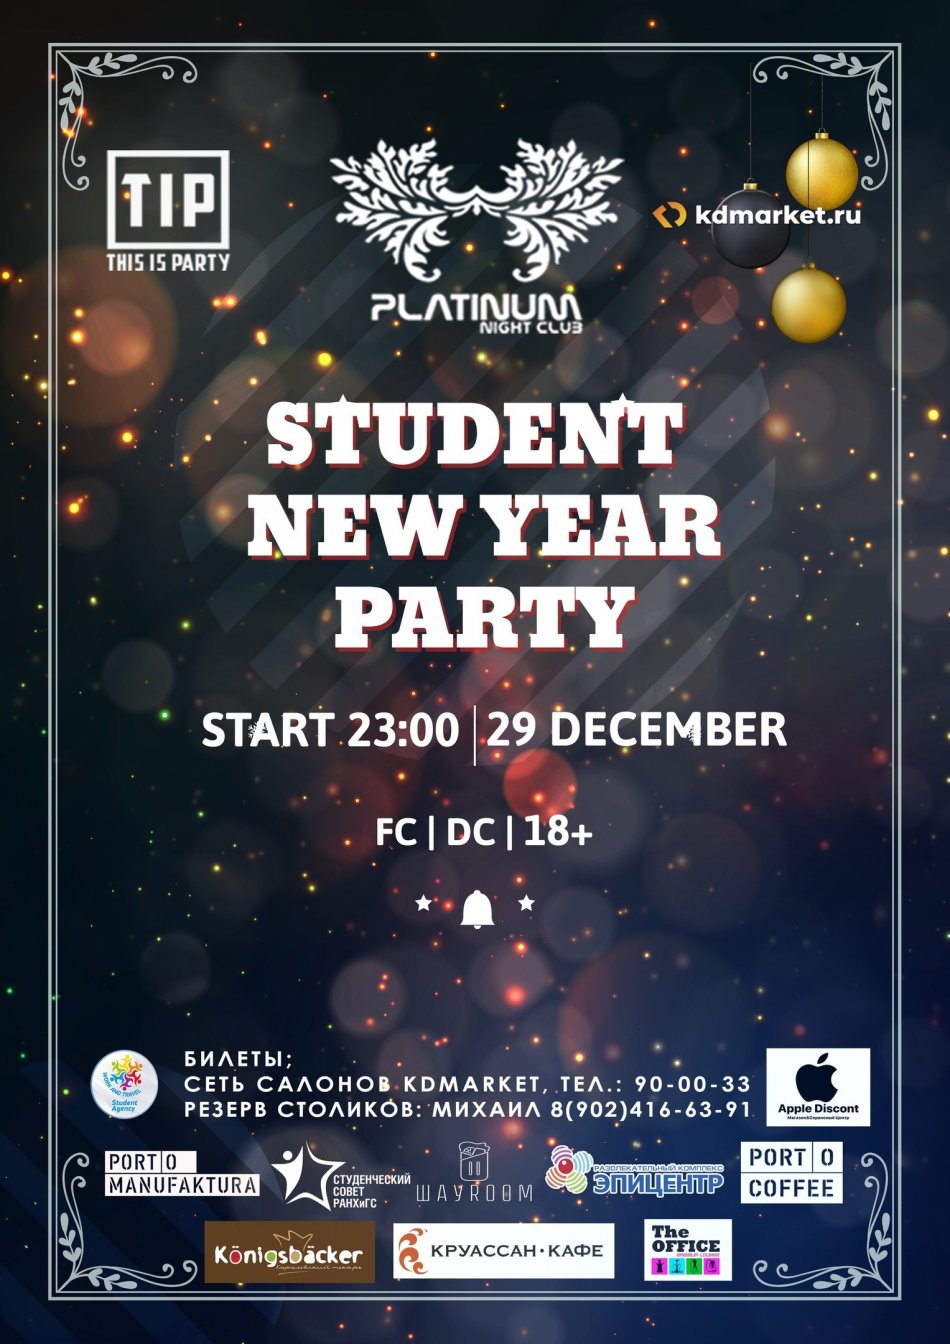 STUDENT NEW YEAR